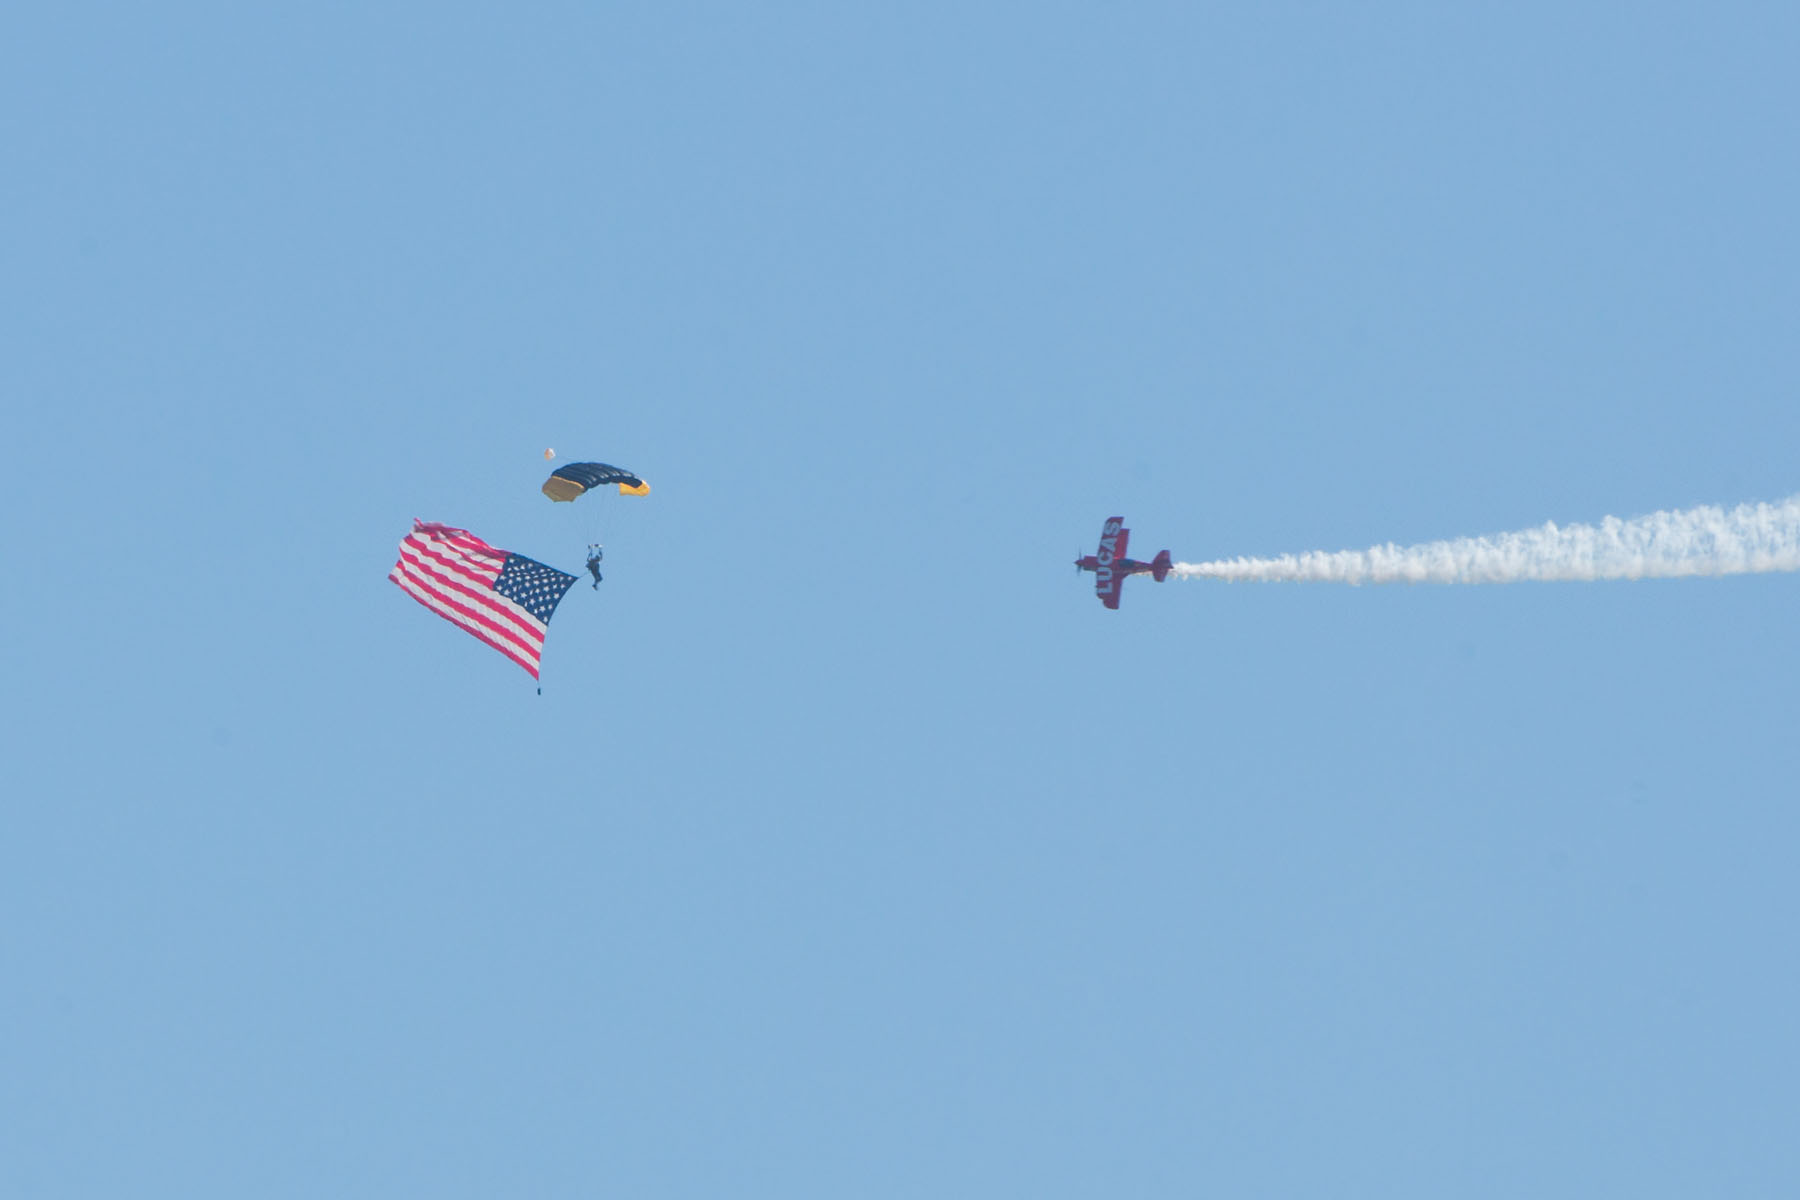 Skydiver brings in the flag, Sioux Falls Air Show, August 2019.  Lucas Oil stunt plane escorts him down.  Click for next photo.